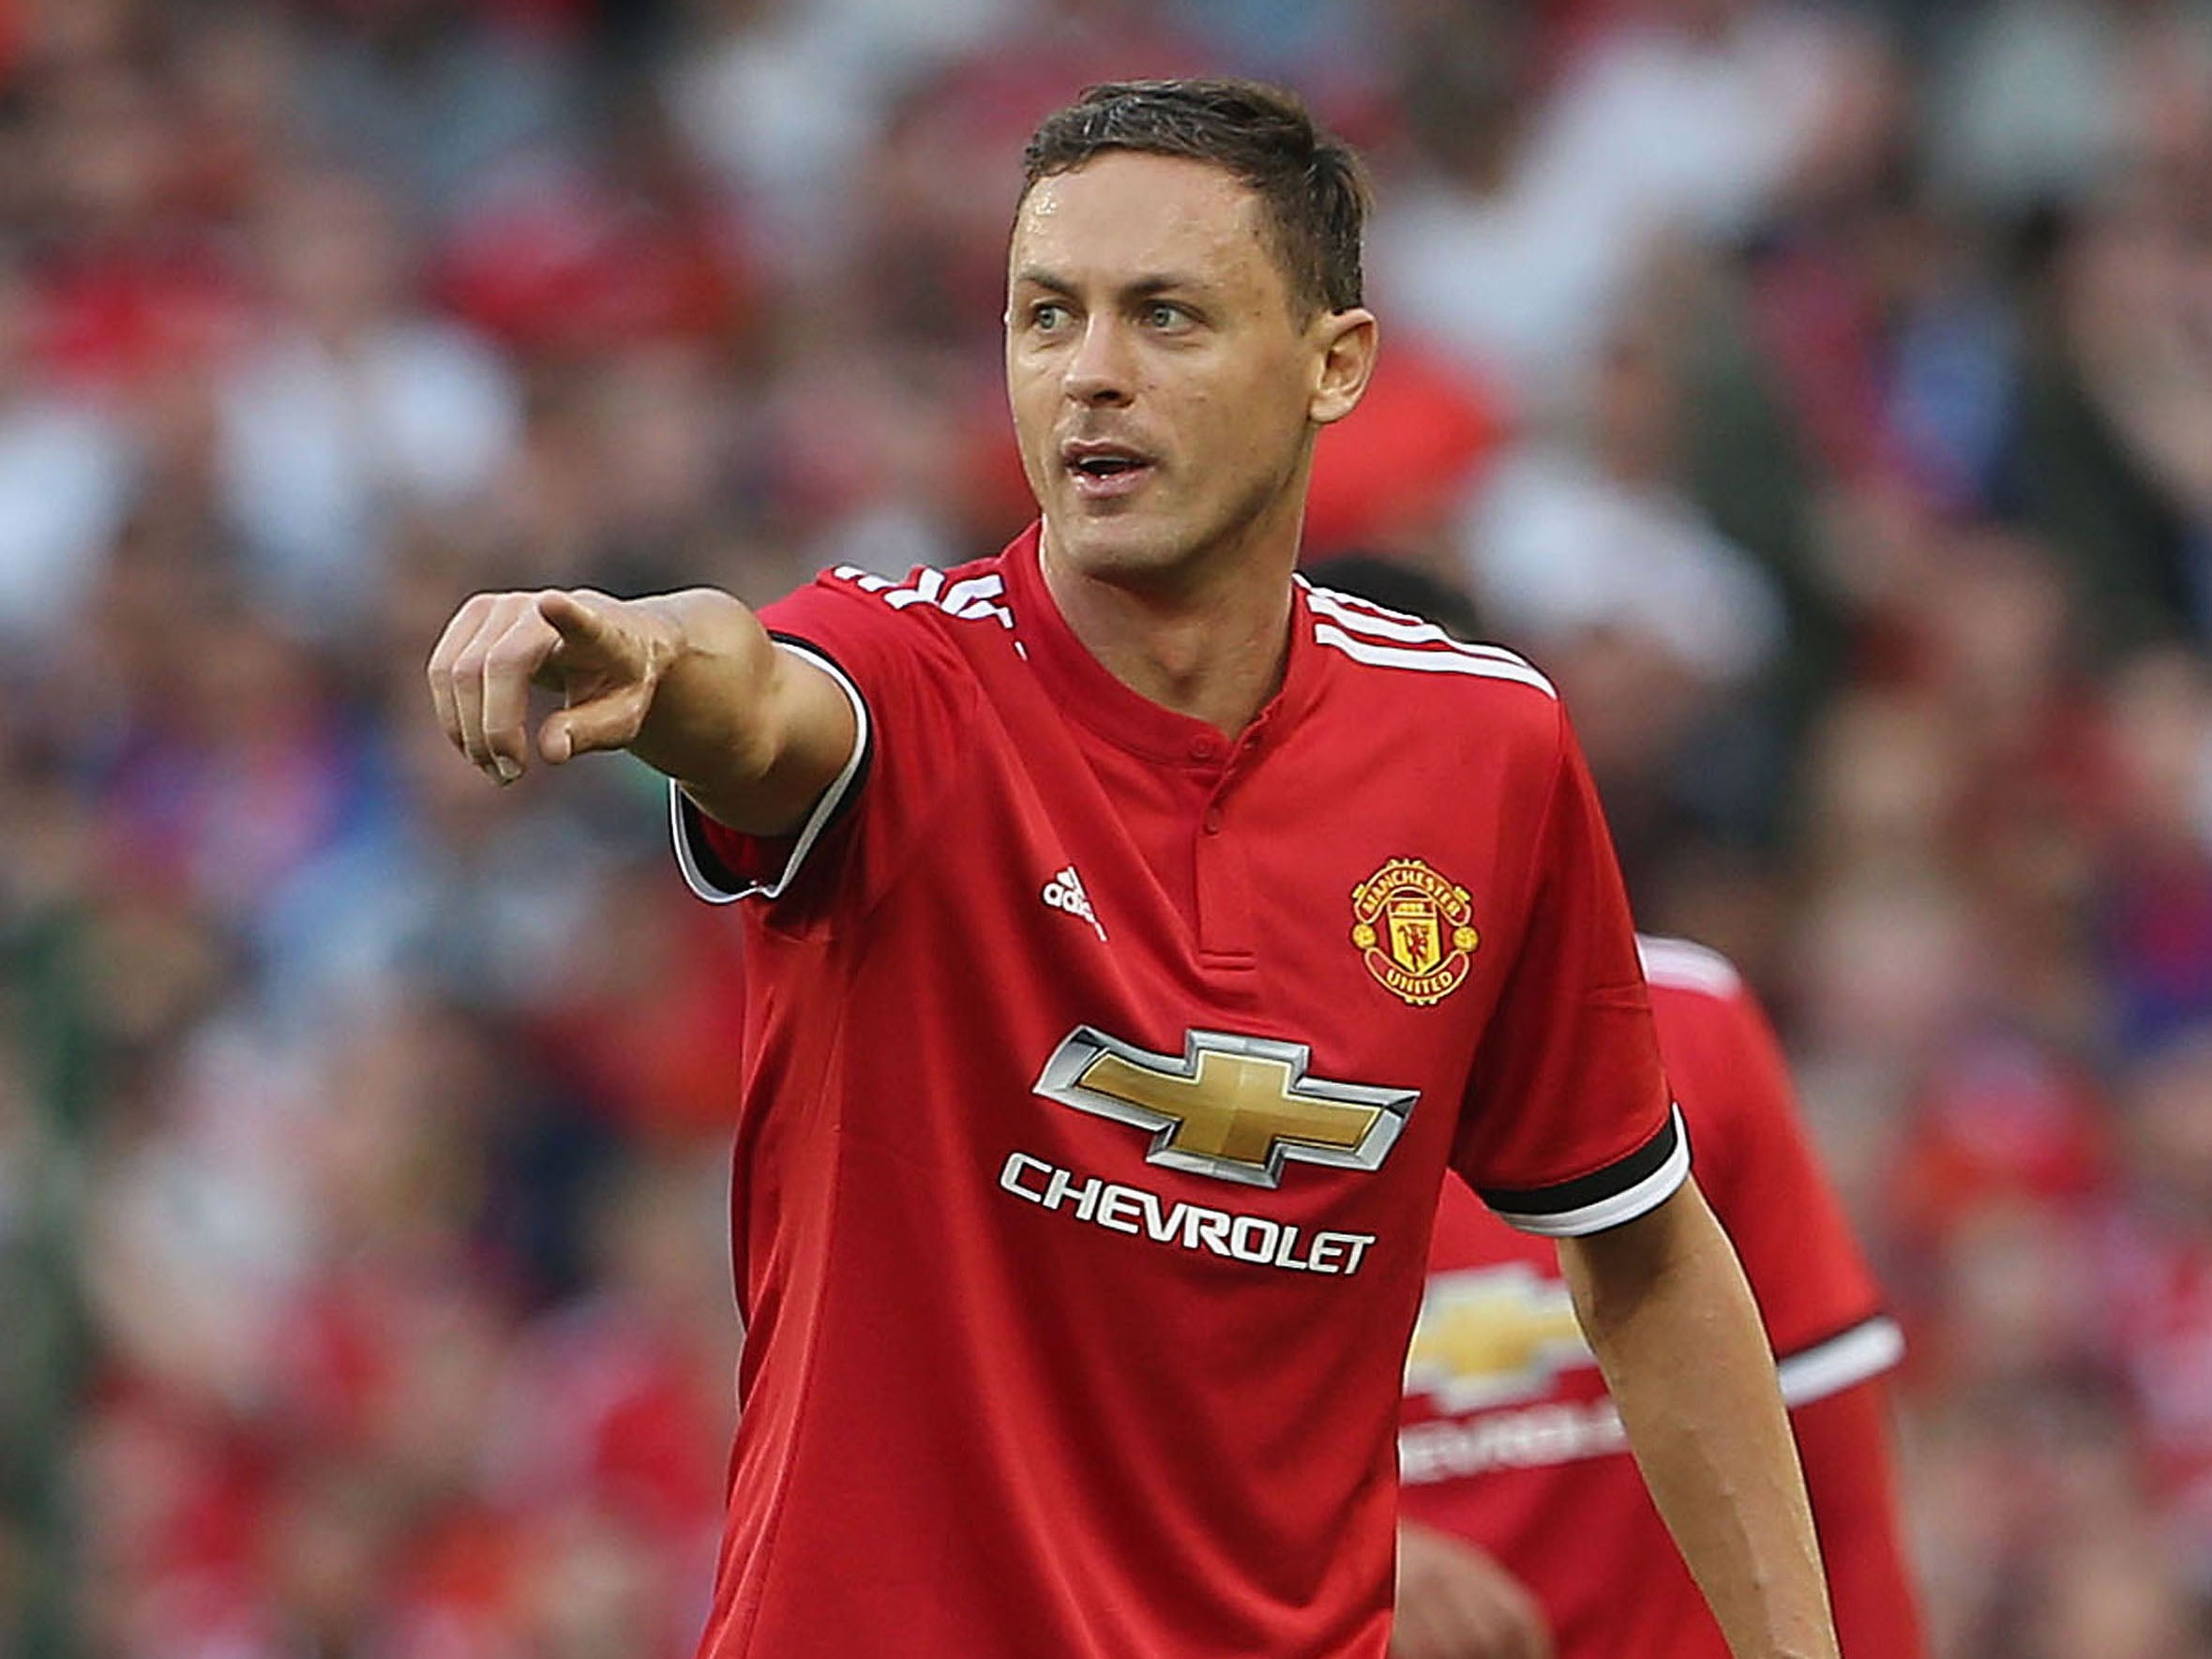 Matic started the game in Dublin and impressed in the holding role